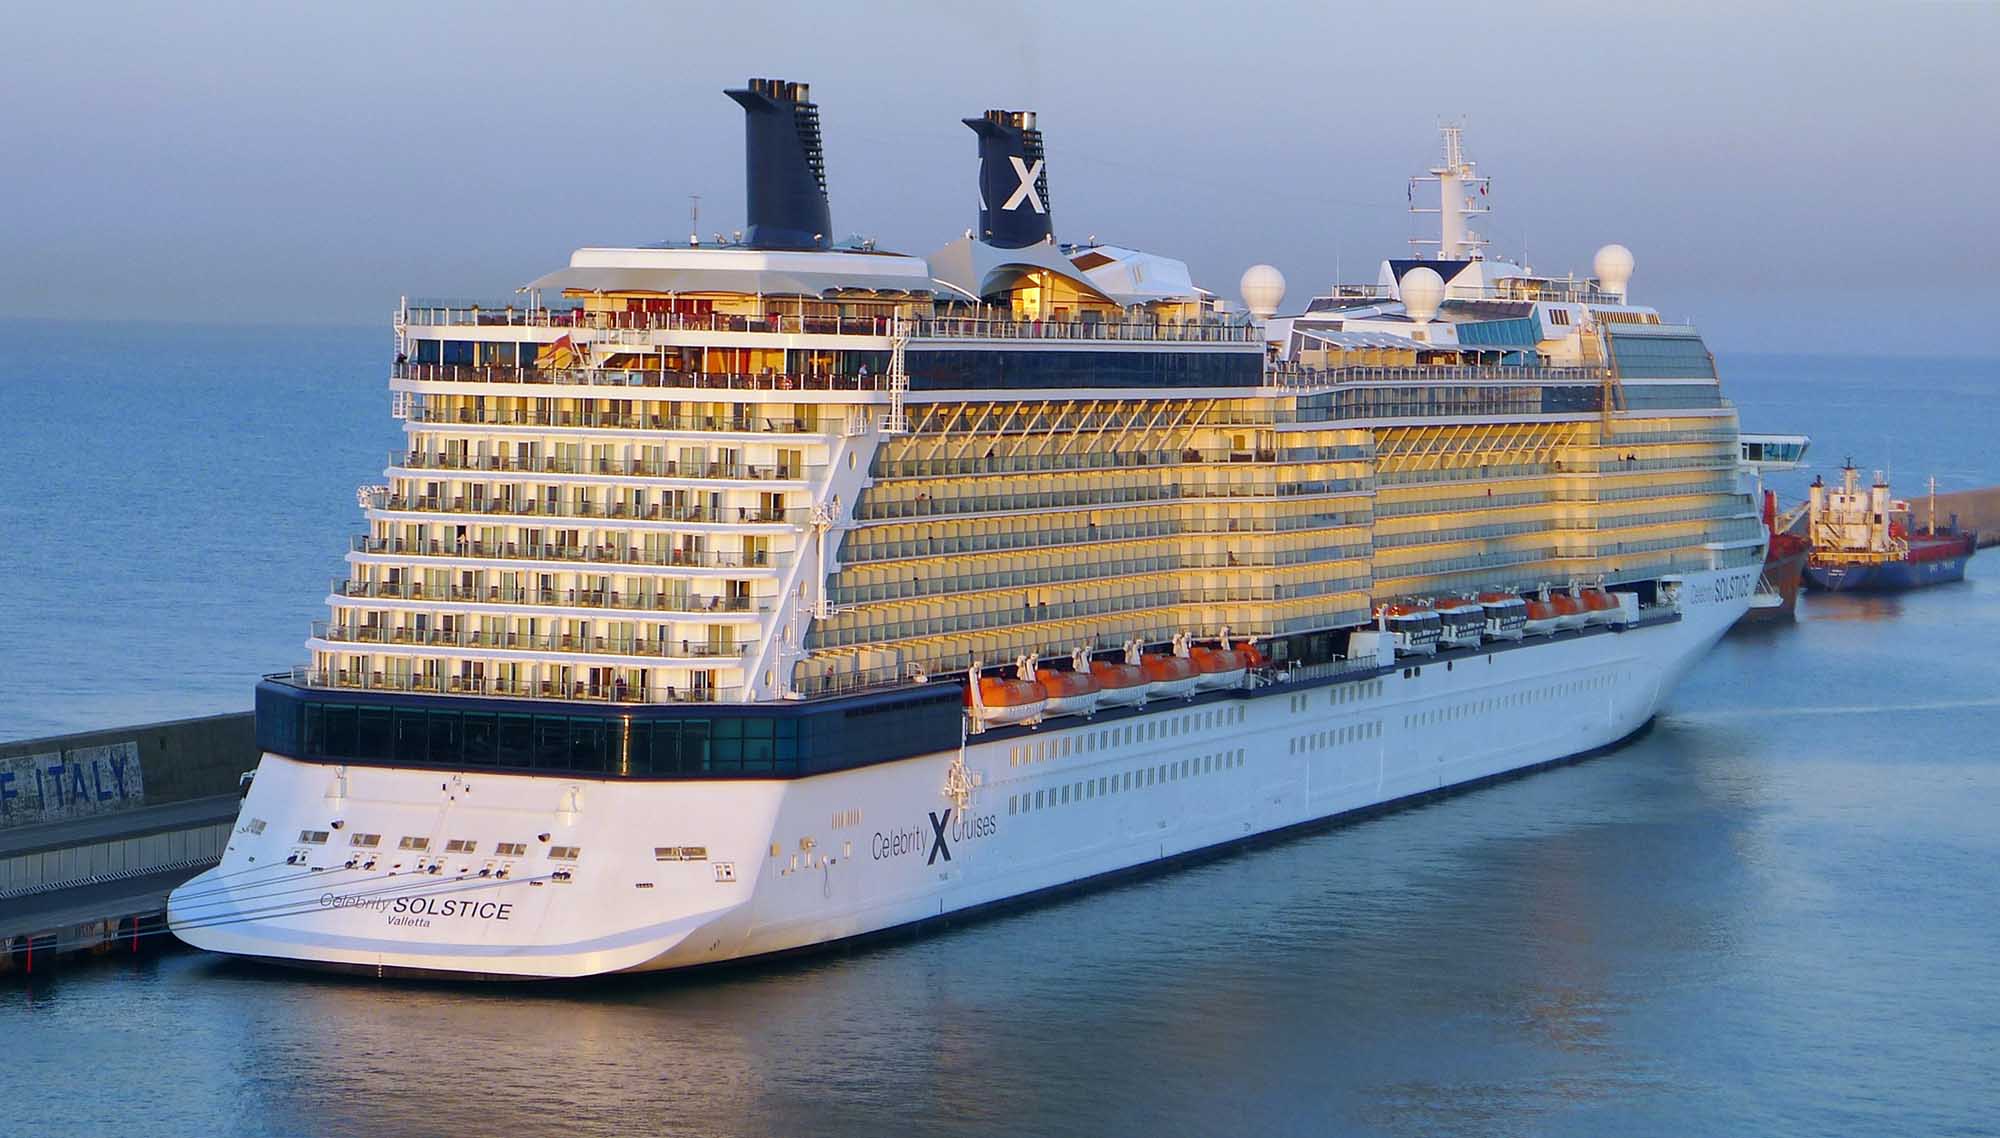 celebrity cruises class of ships